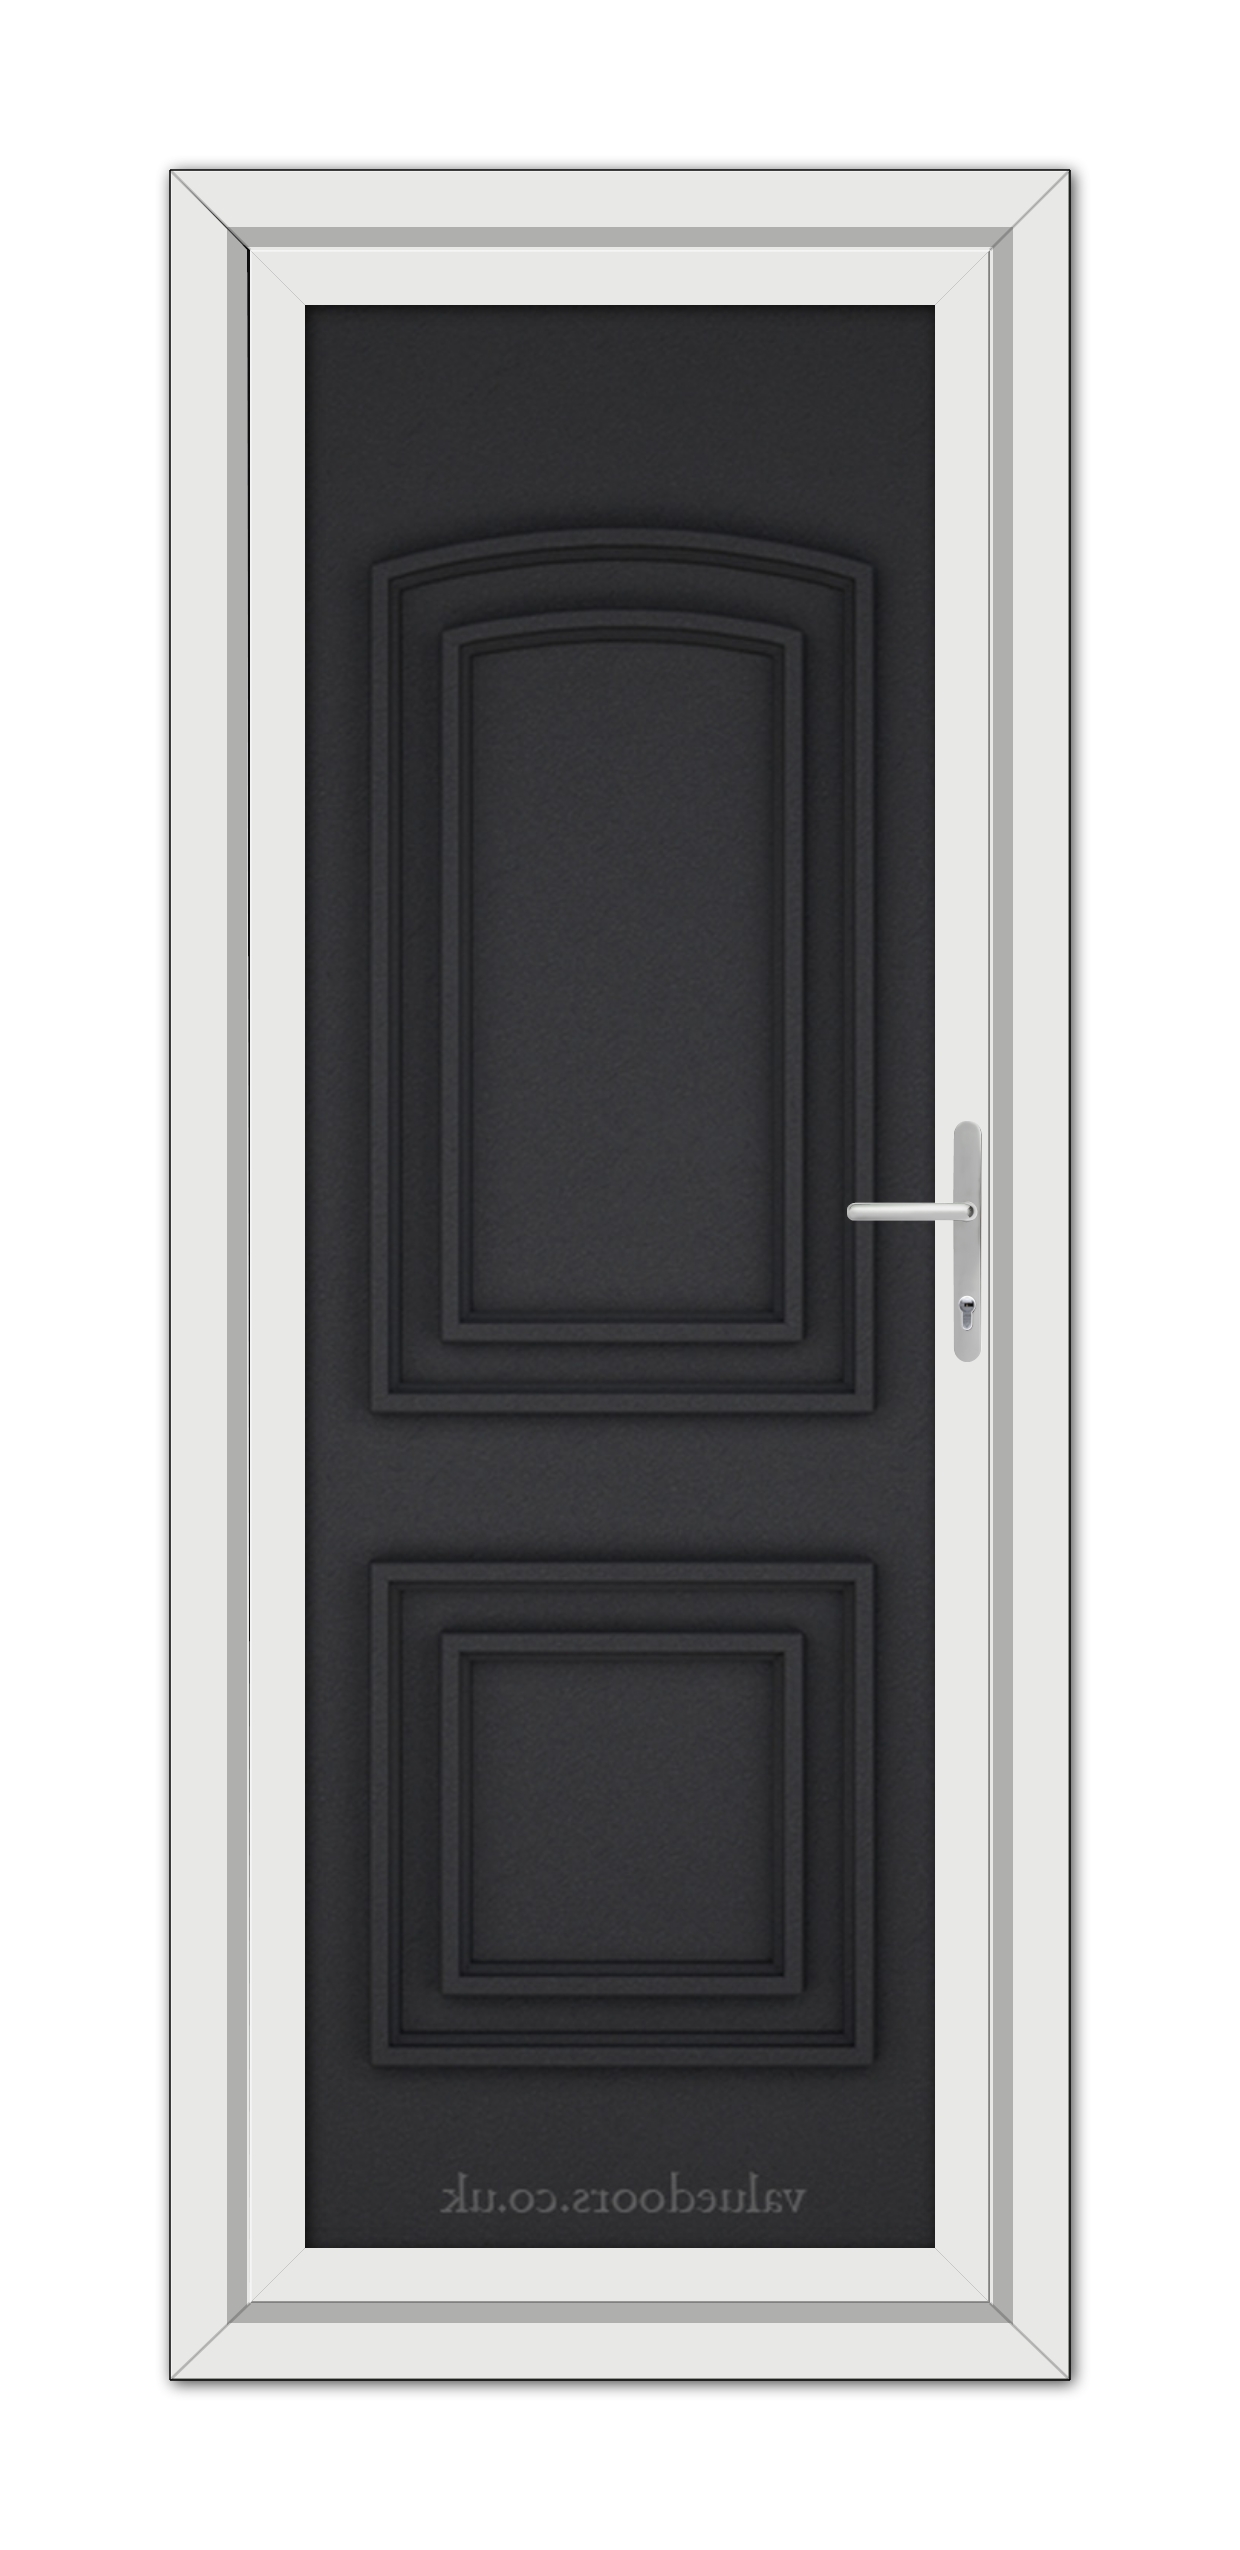 A vertical image of a Black Brown Balmoral Solid uPVC Door with a silver handle, set within a white door frame.